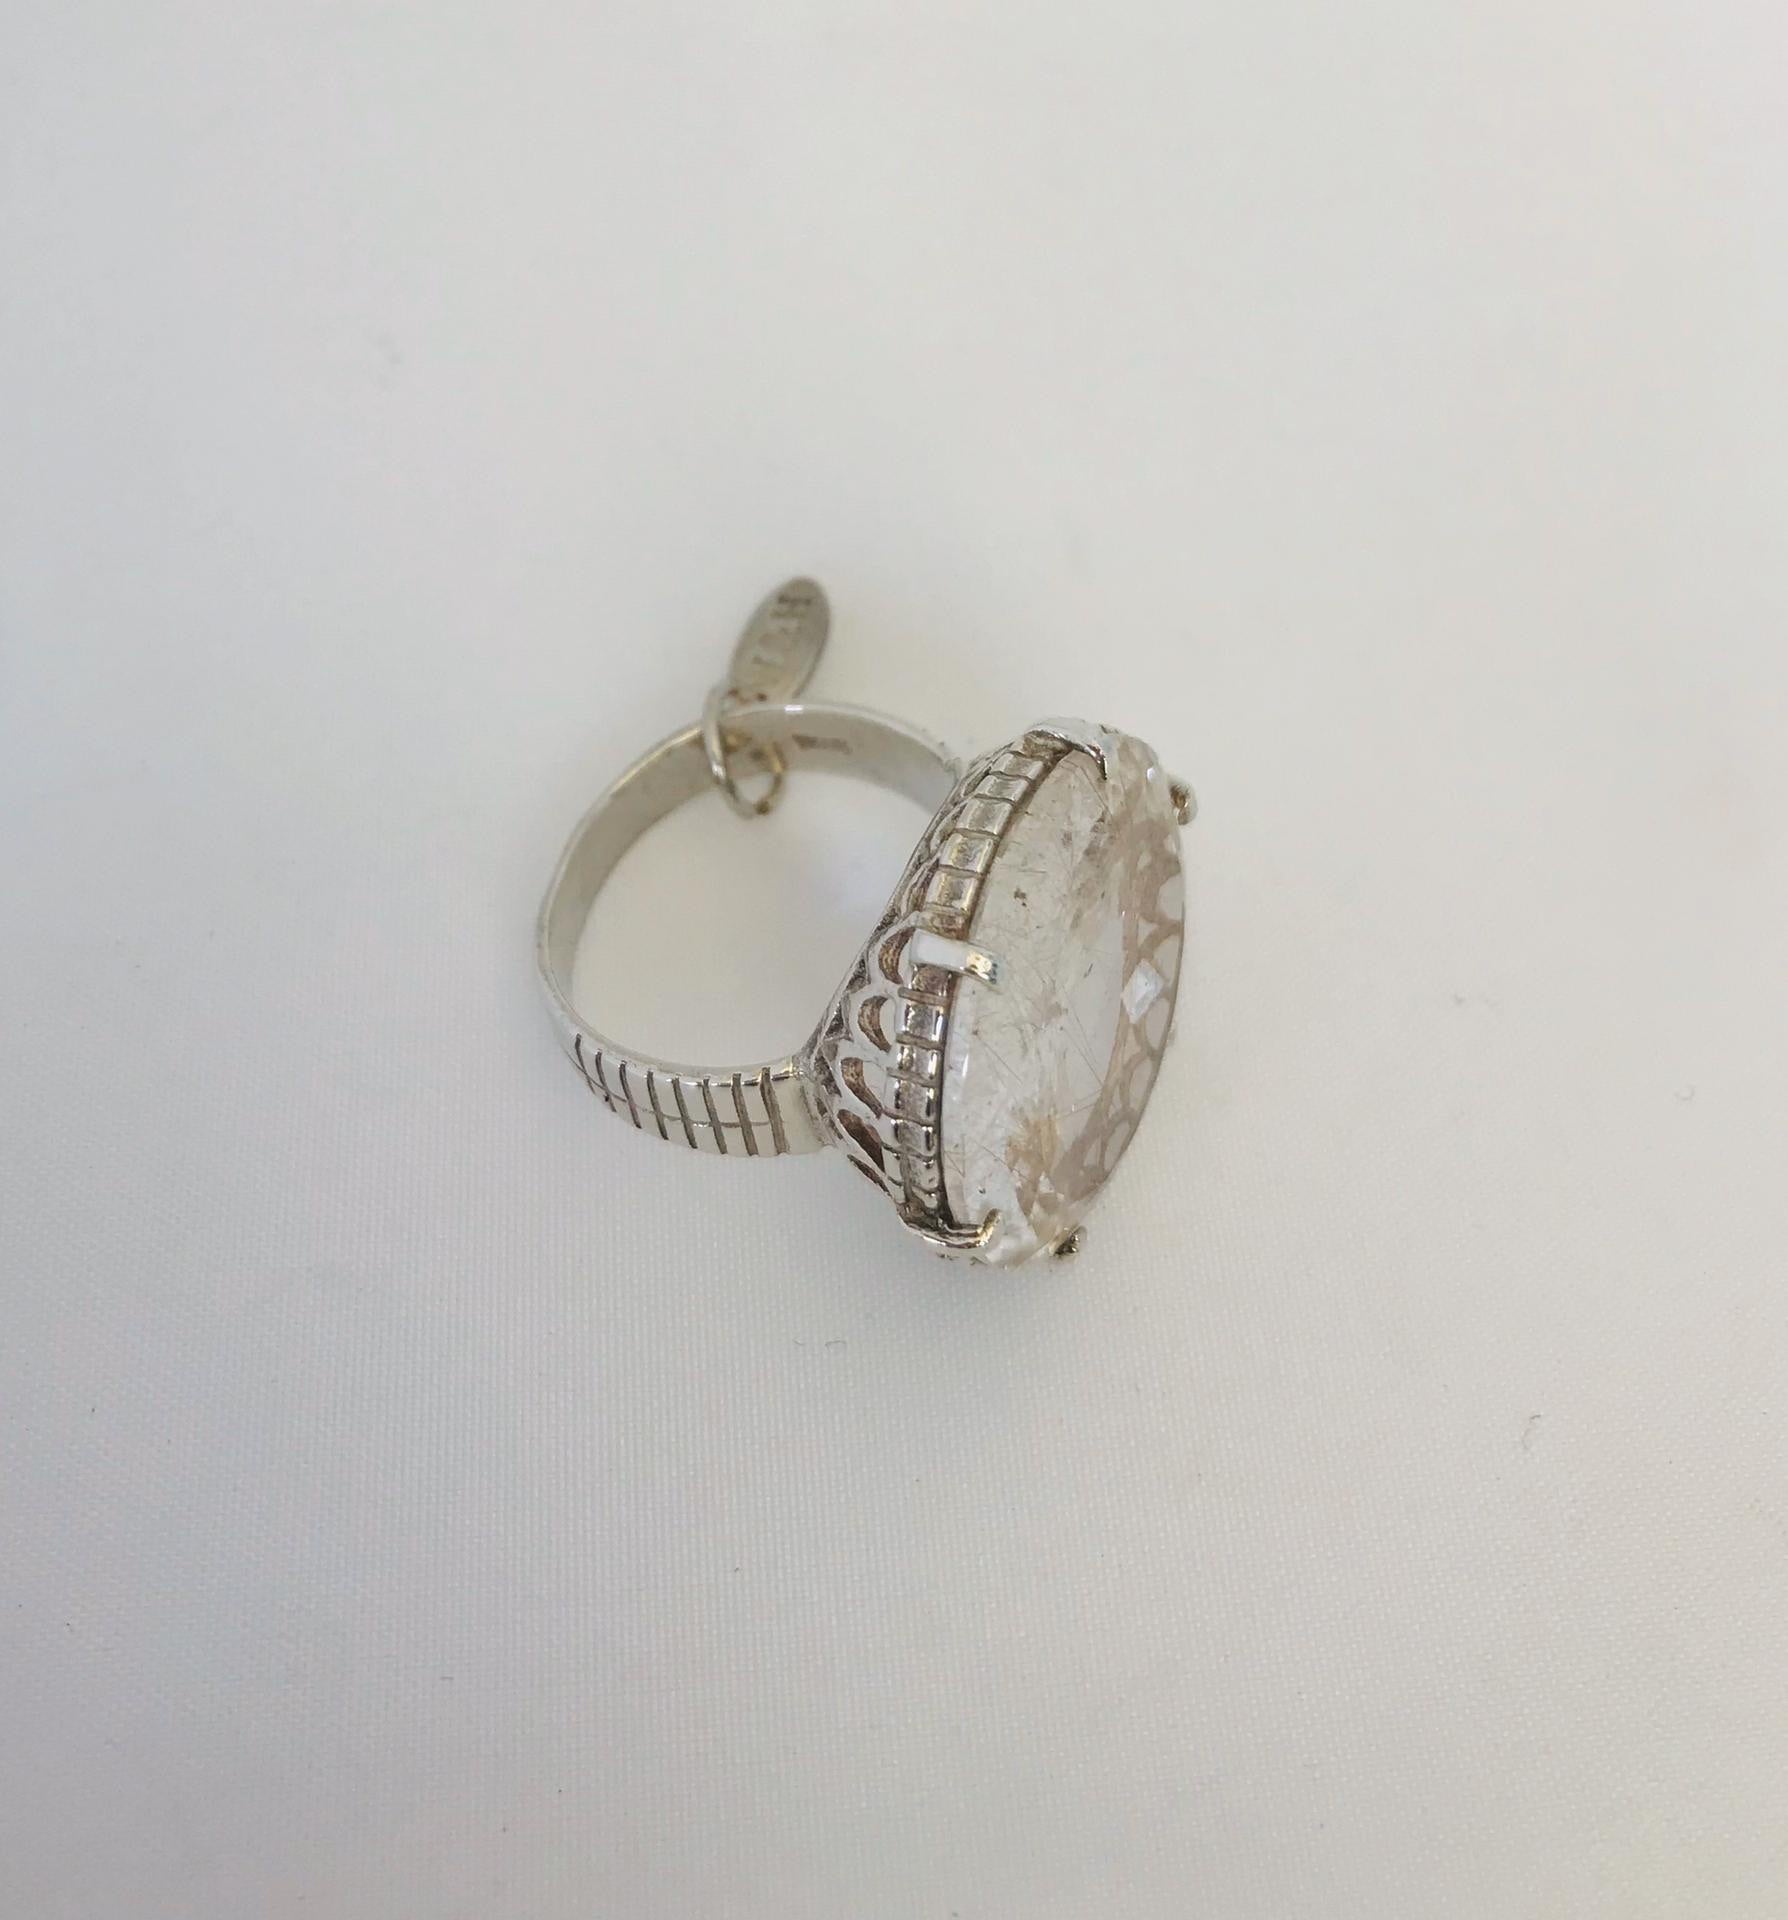 Wouters & Hendrix - silver clear rutilated quartz ring